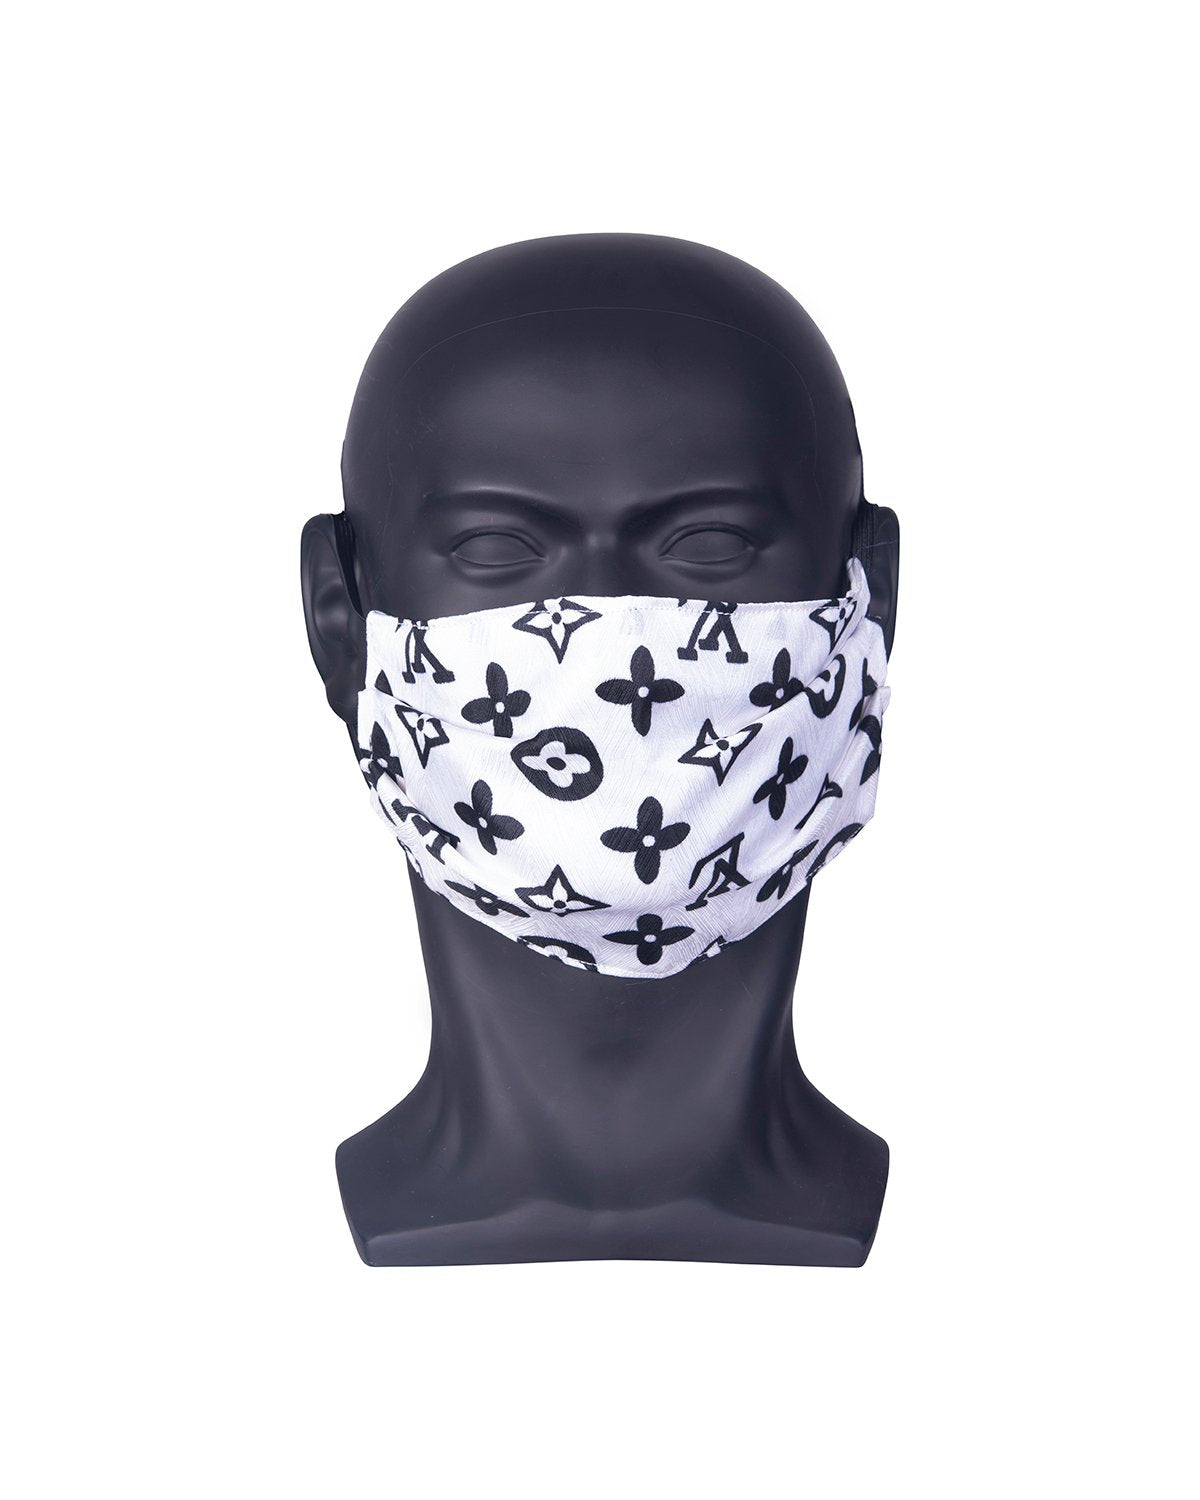 LV face mask, does anyone know if these are based off real